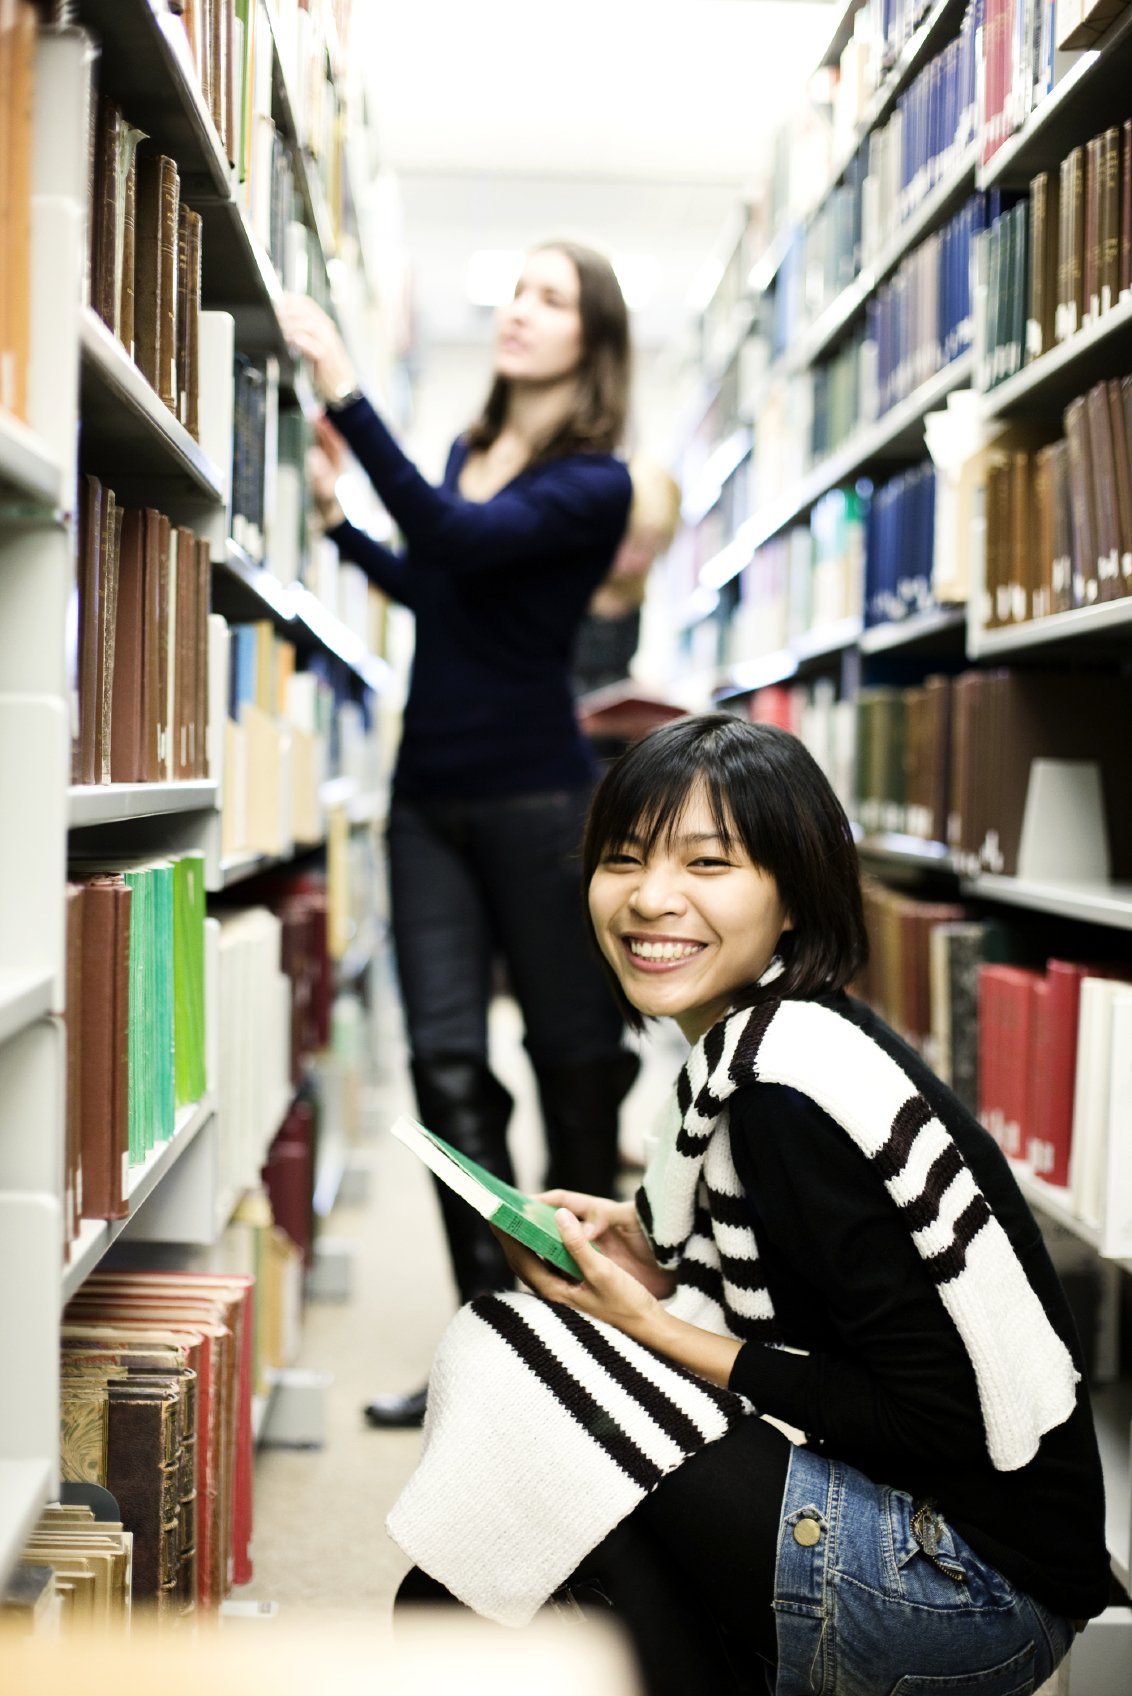 Two young ladies searching for books in a library.